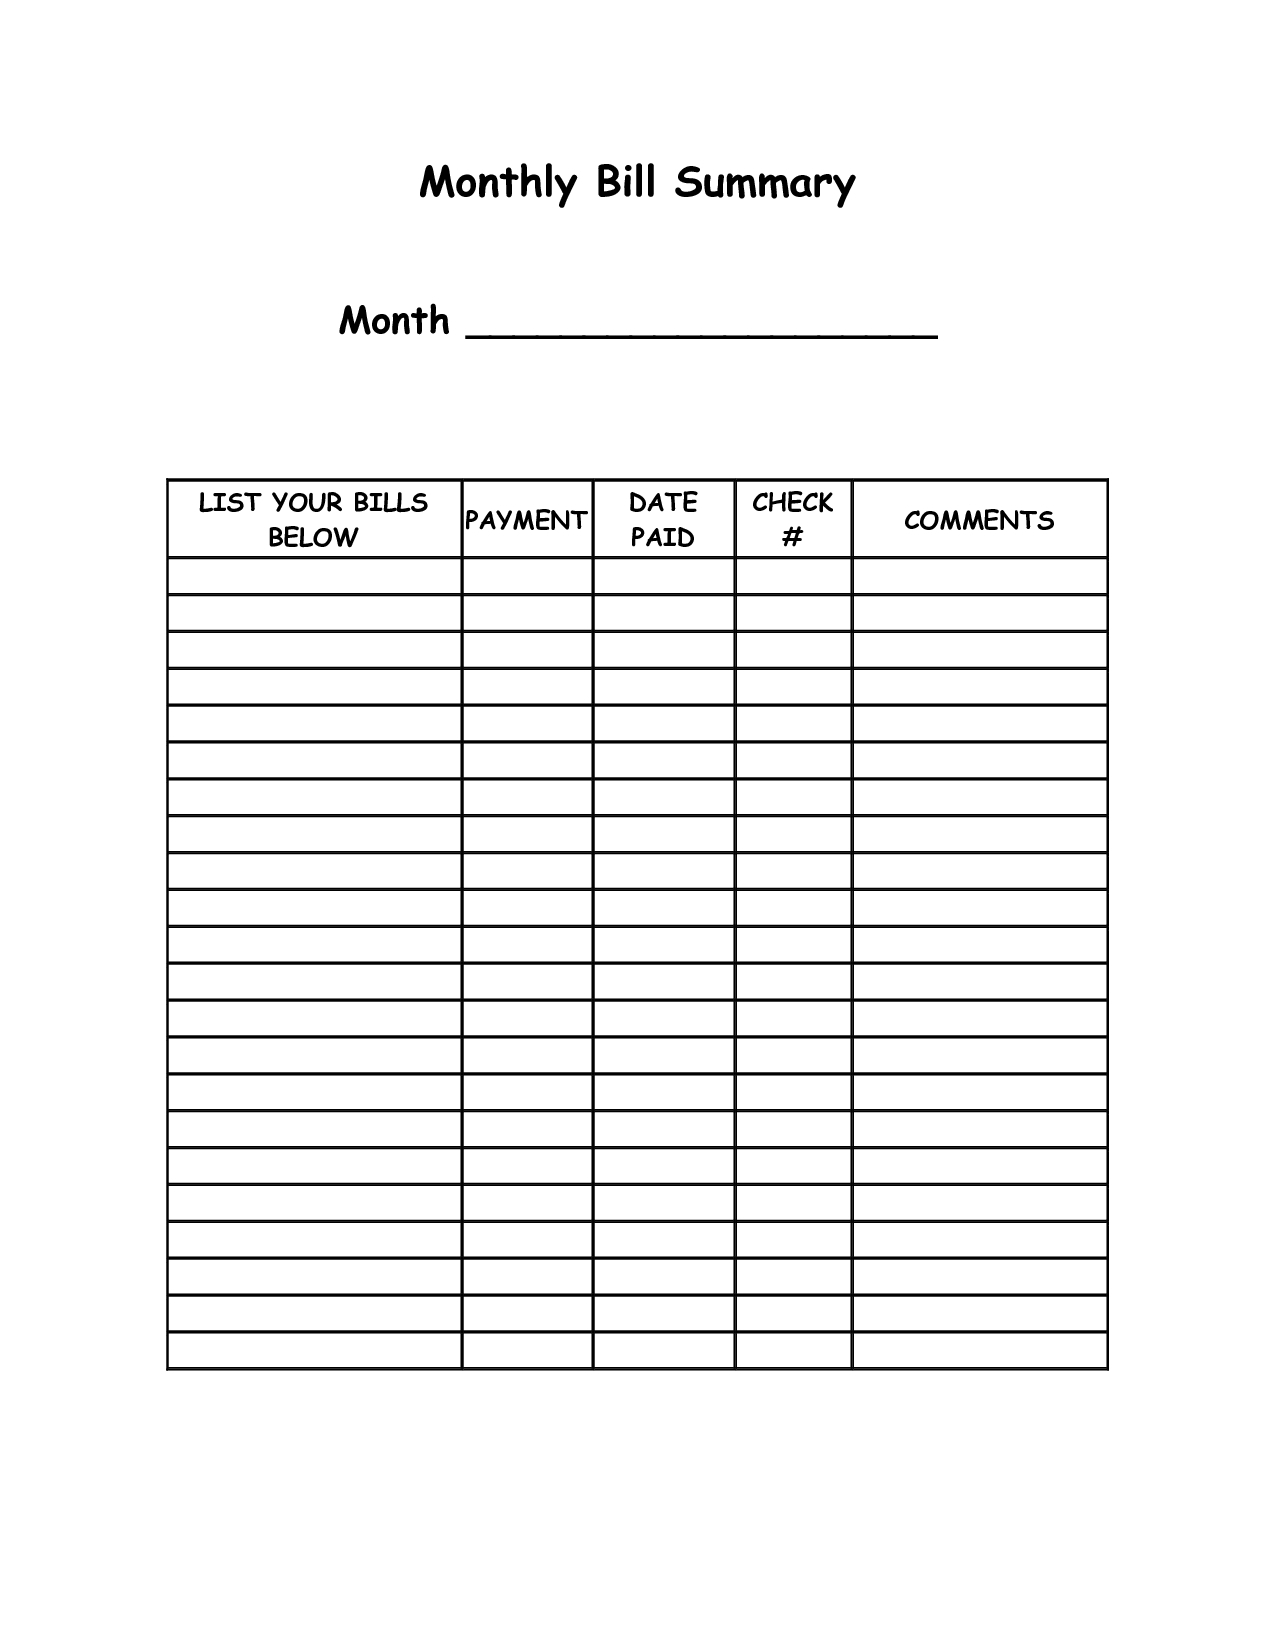 Free Monthly Bill Payment Sheet | Template Calendar Printable throughout Bills Paid In And Out Sheet